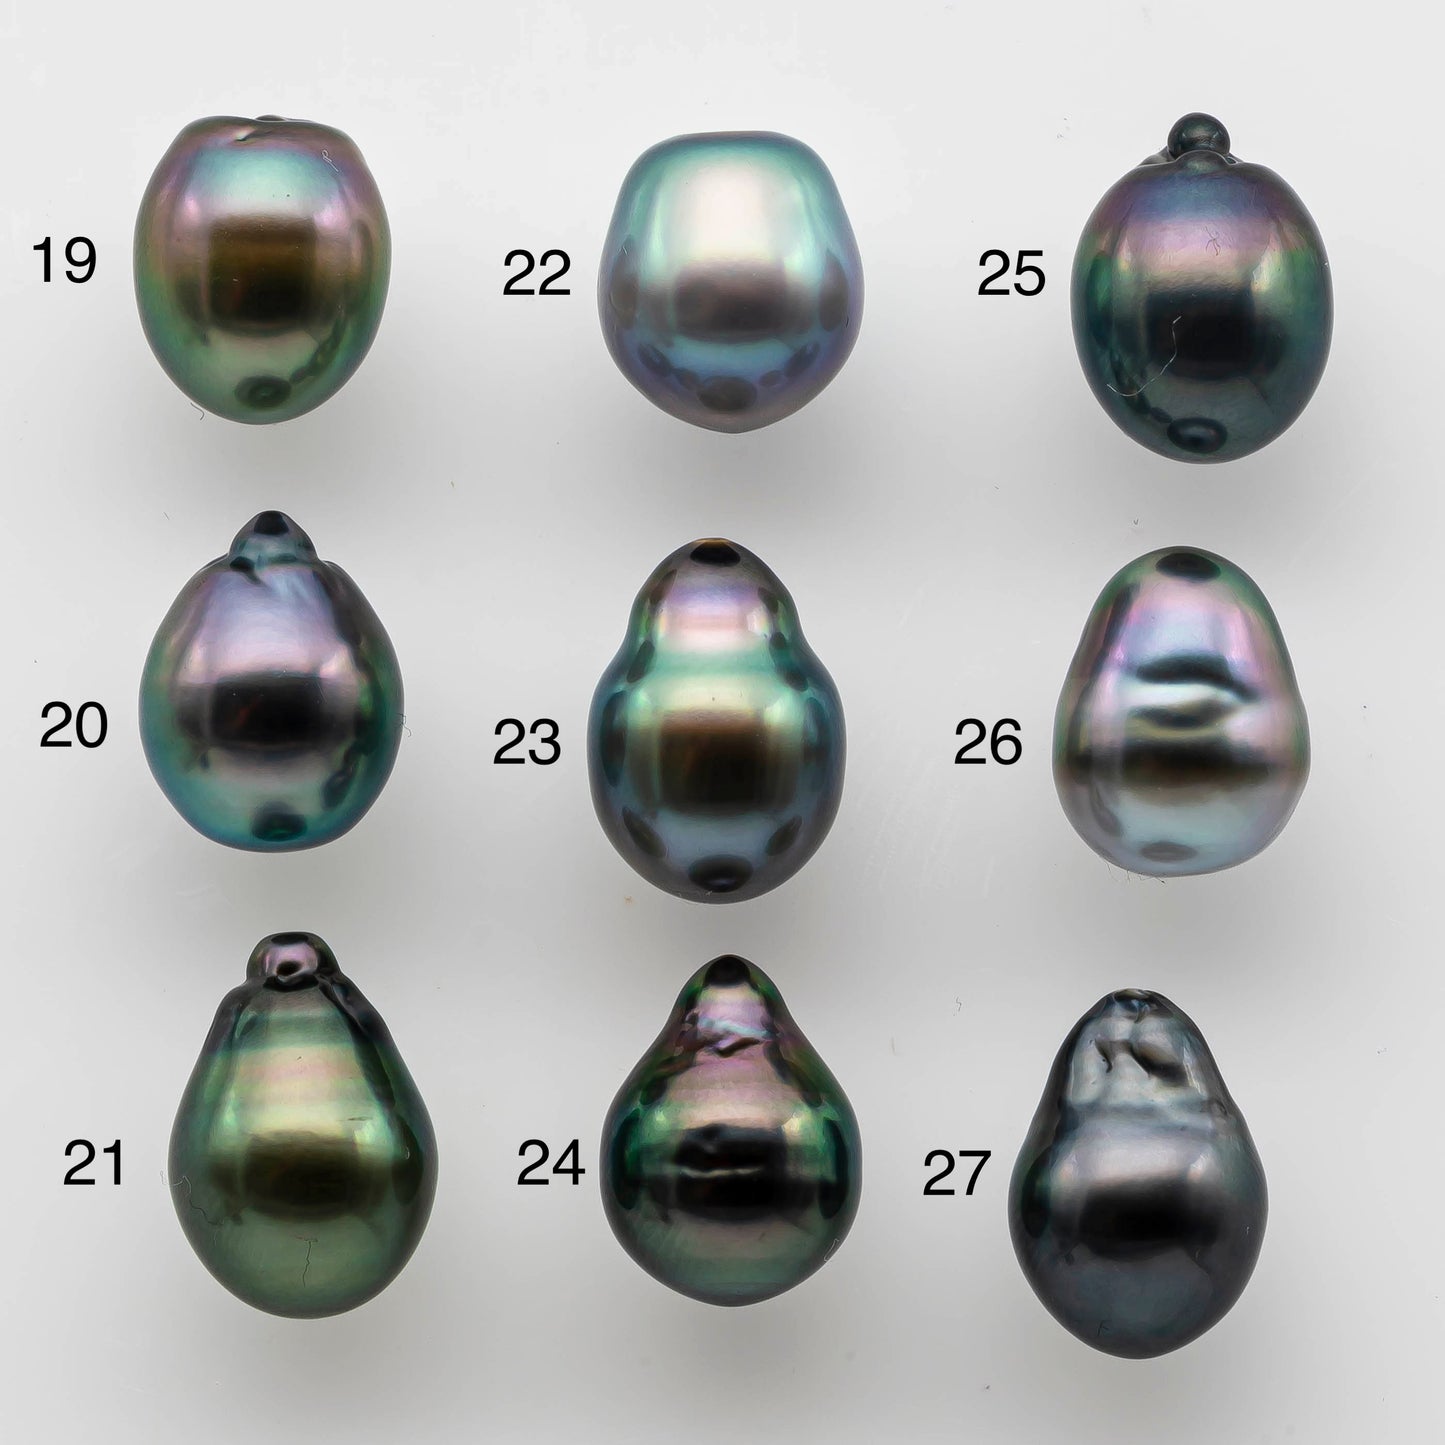 9-10mm Colorful Tahitian Baroque Teardrop Pearl Undrilled Loose Single Piece Natural Color  and High Luster with Minor Blemish, SKU # 1478TH